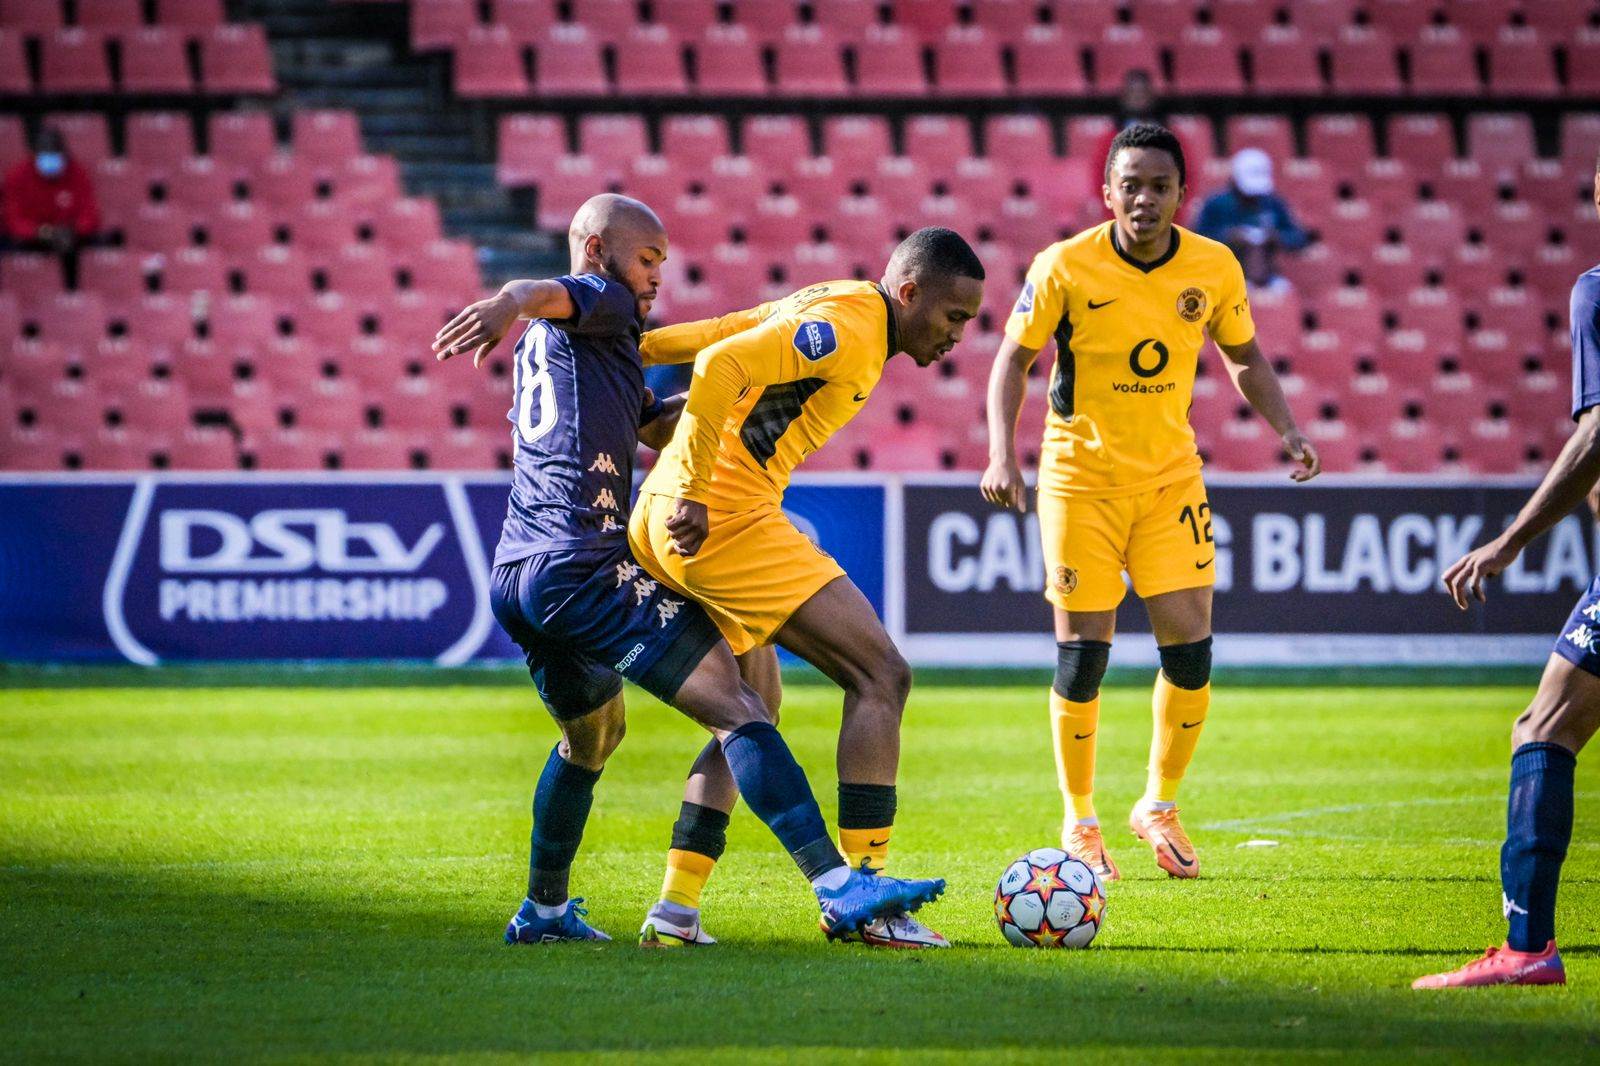 Kaizer Chiefs to use special new Kappa ball in DStv Premiership!